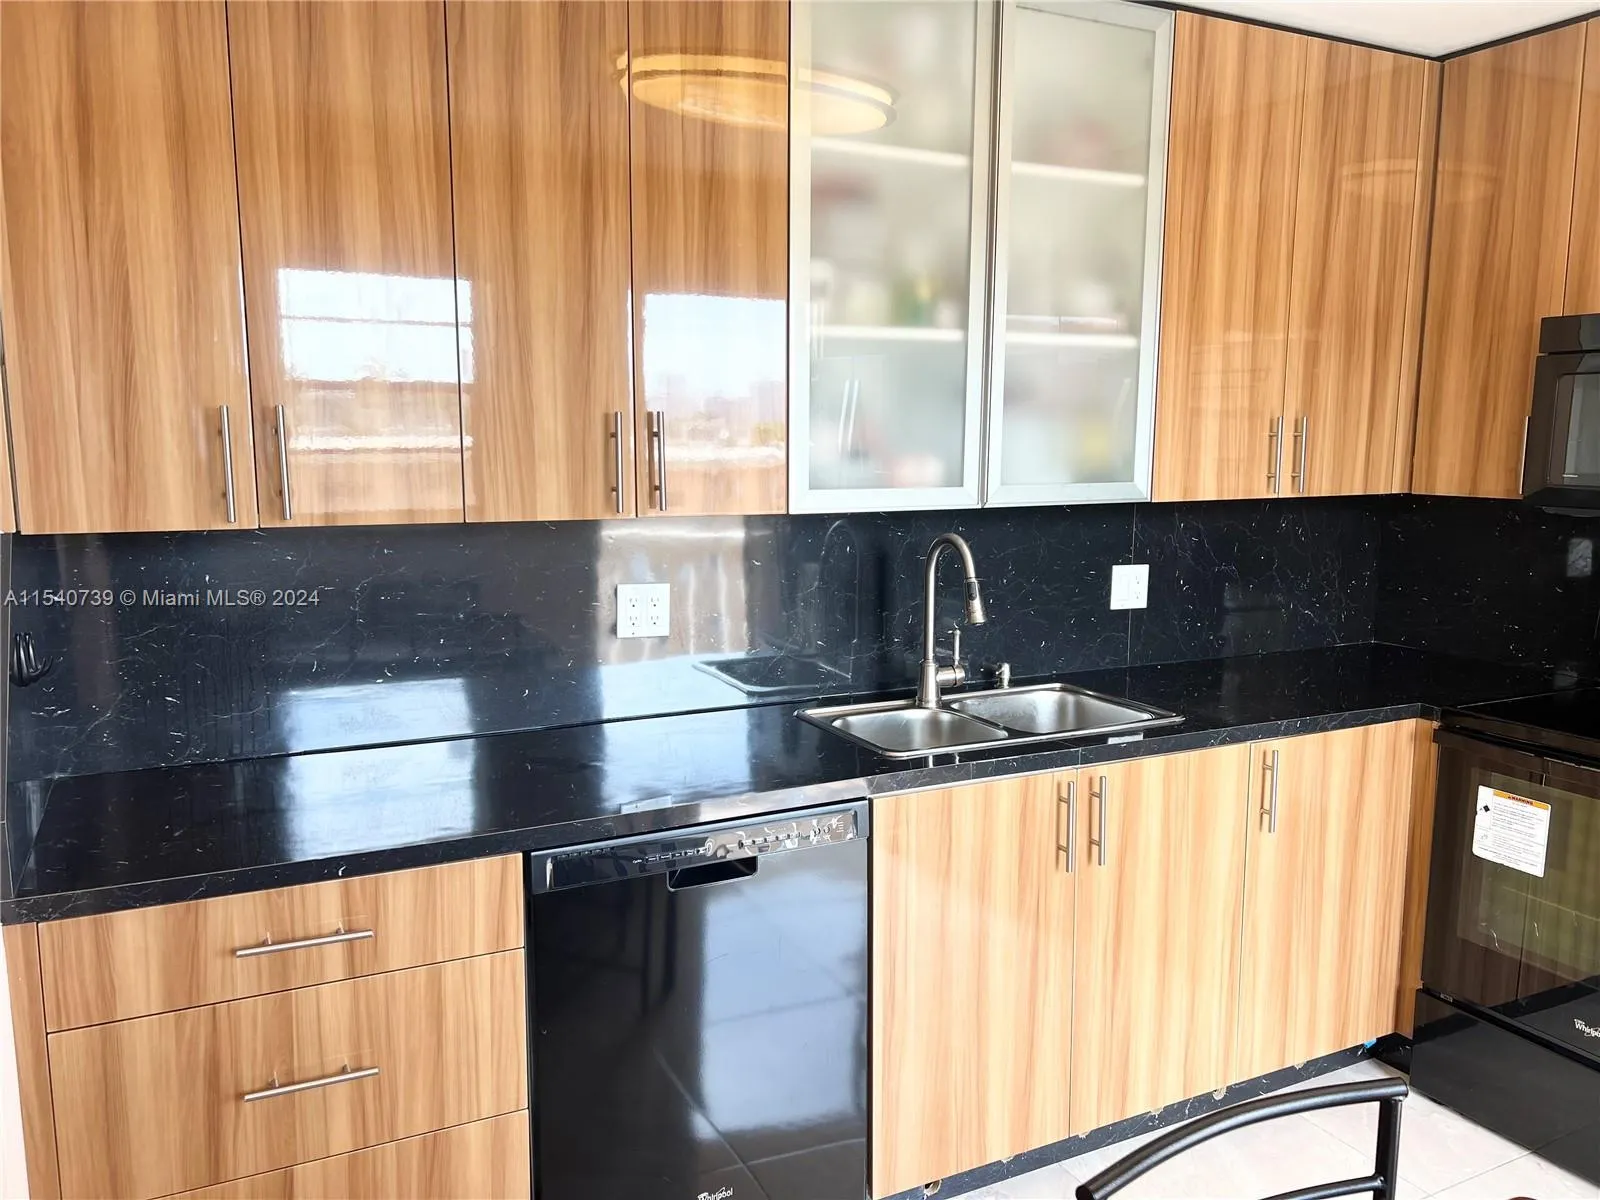 Beautiful modern Italian eat-in kitchen. Custom cabinetry till the ceiling. Fully integrated organizational/storage system cabinetry and plenty of countertop space.